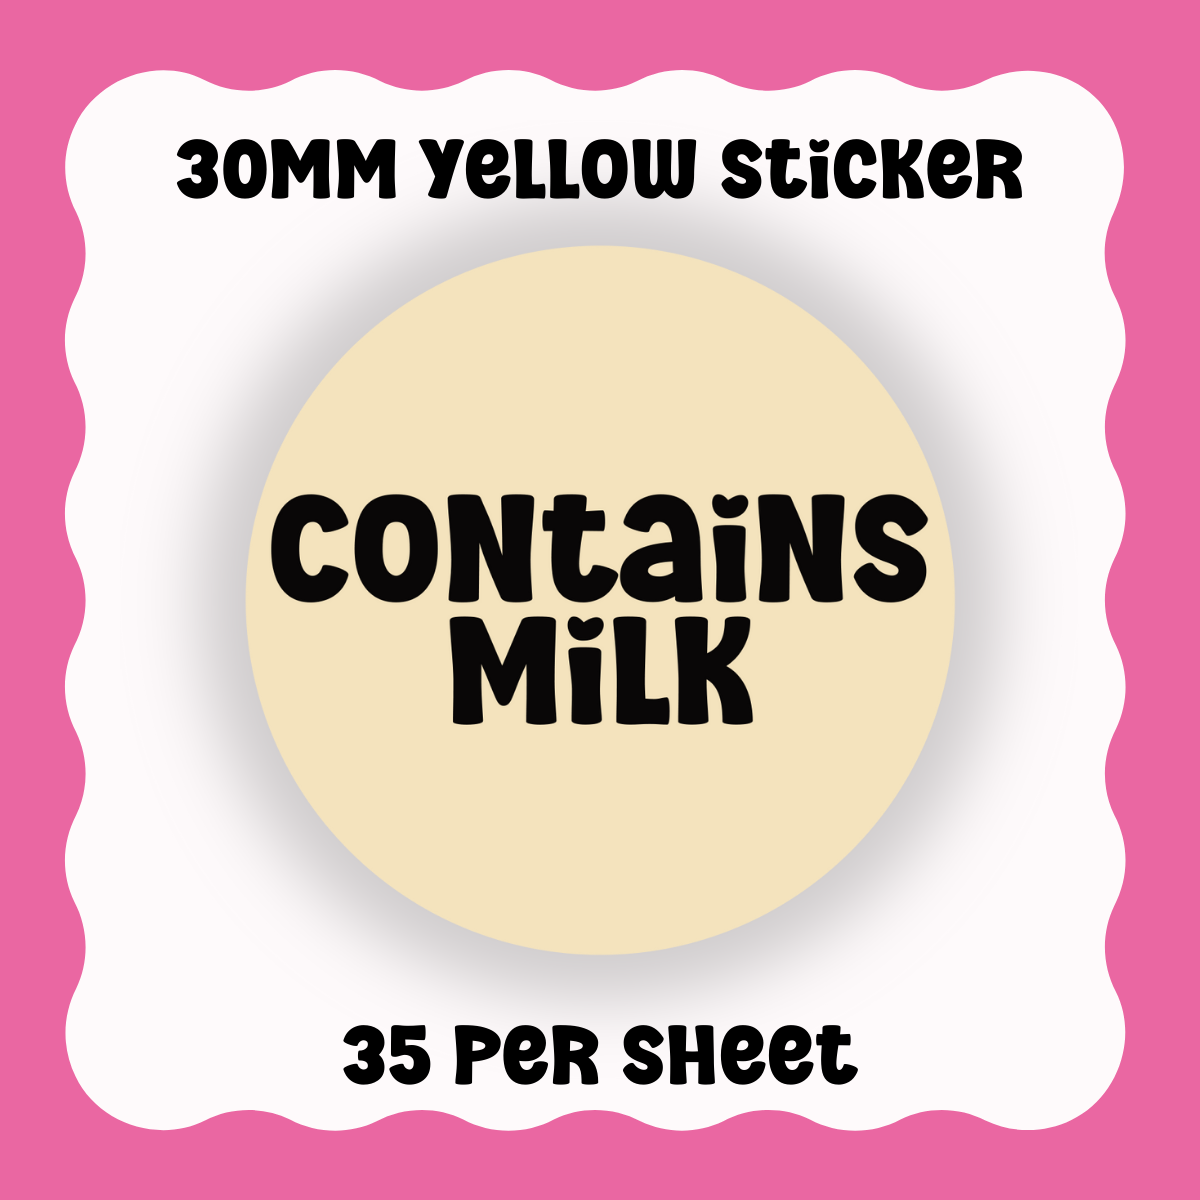 Contains Milk - Text only